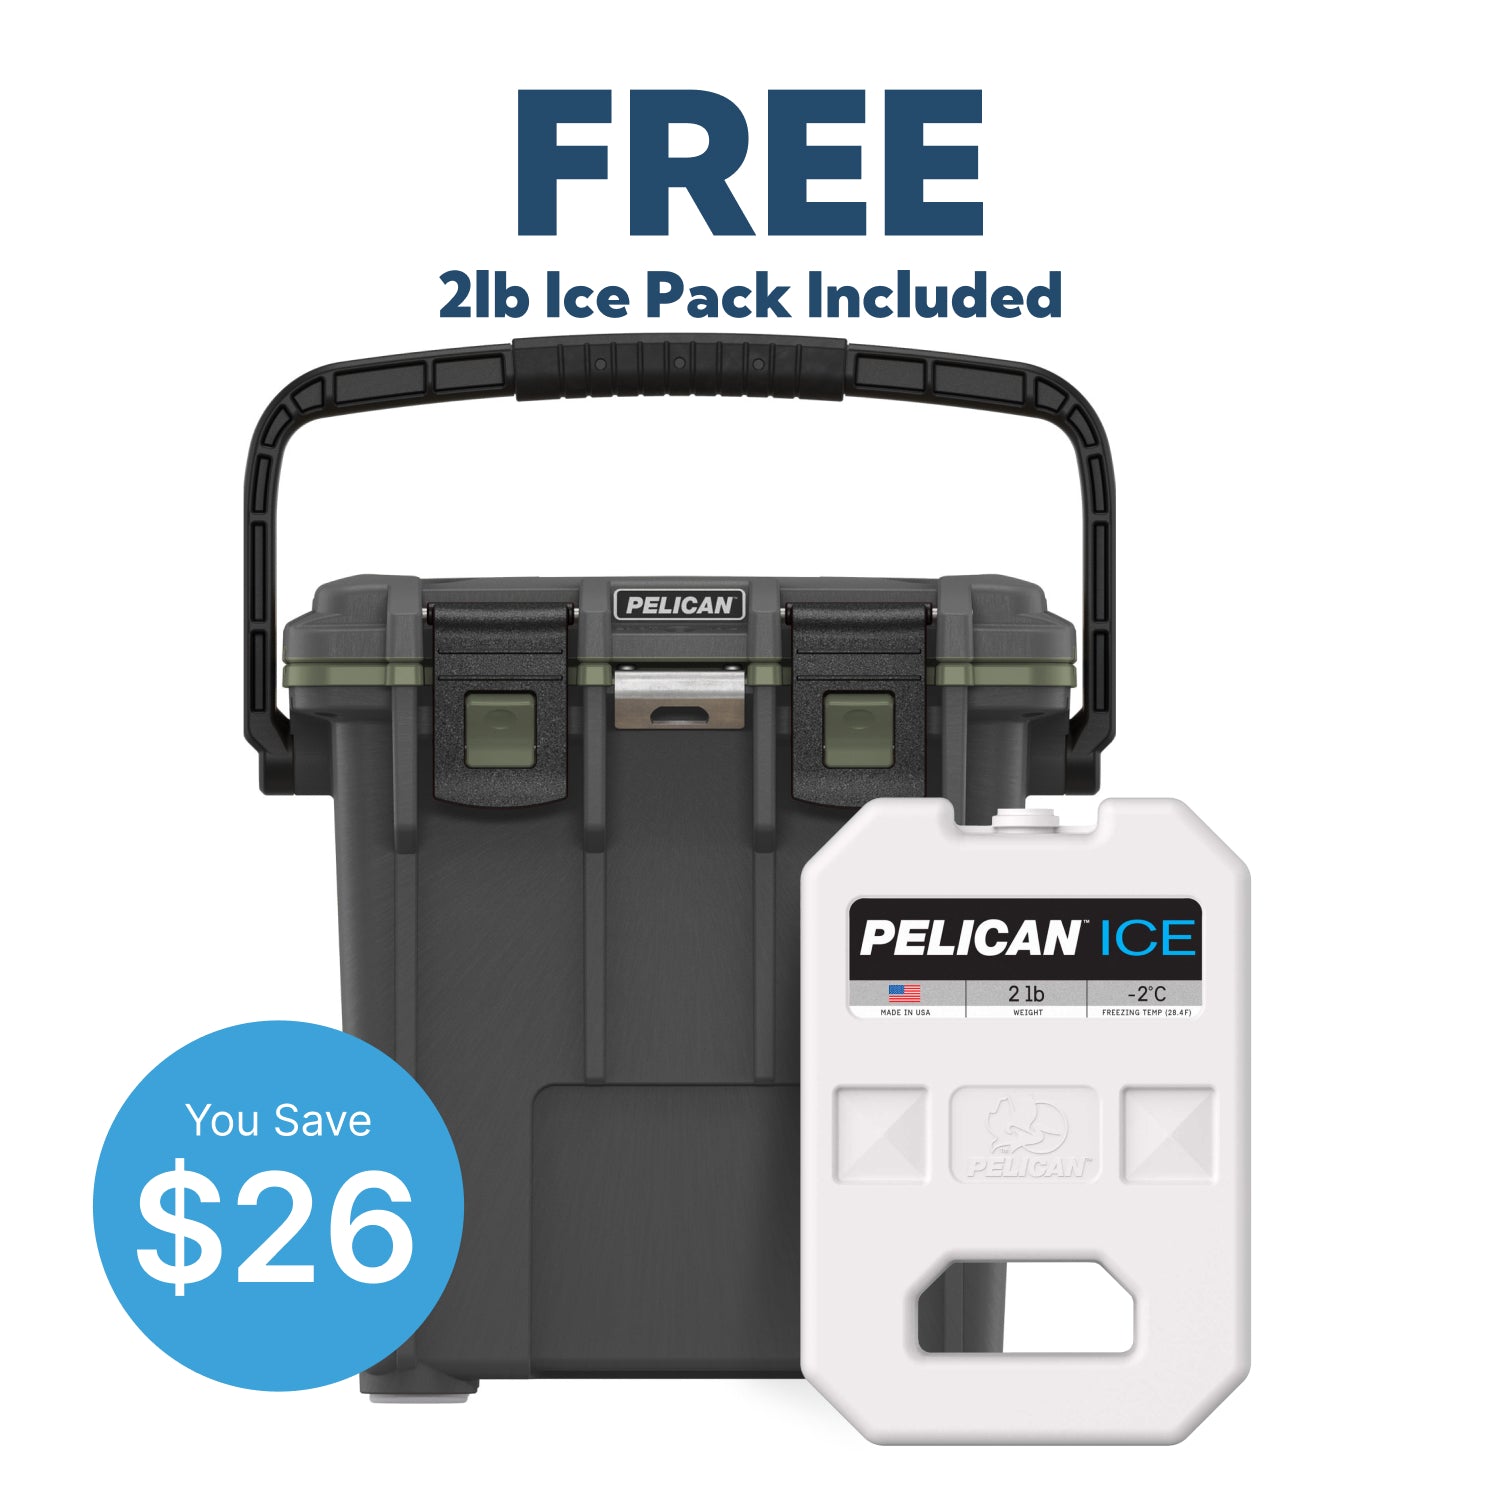 Dark Grey / Green Pelican 20QT Cooler With Free 2lb Ice Pack